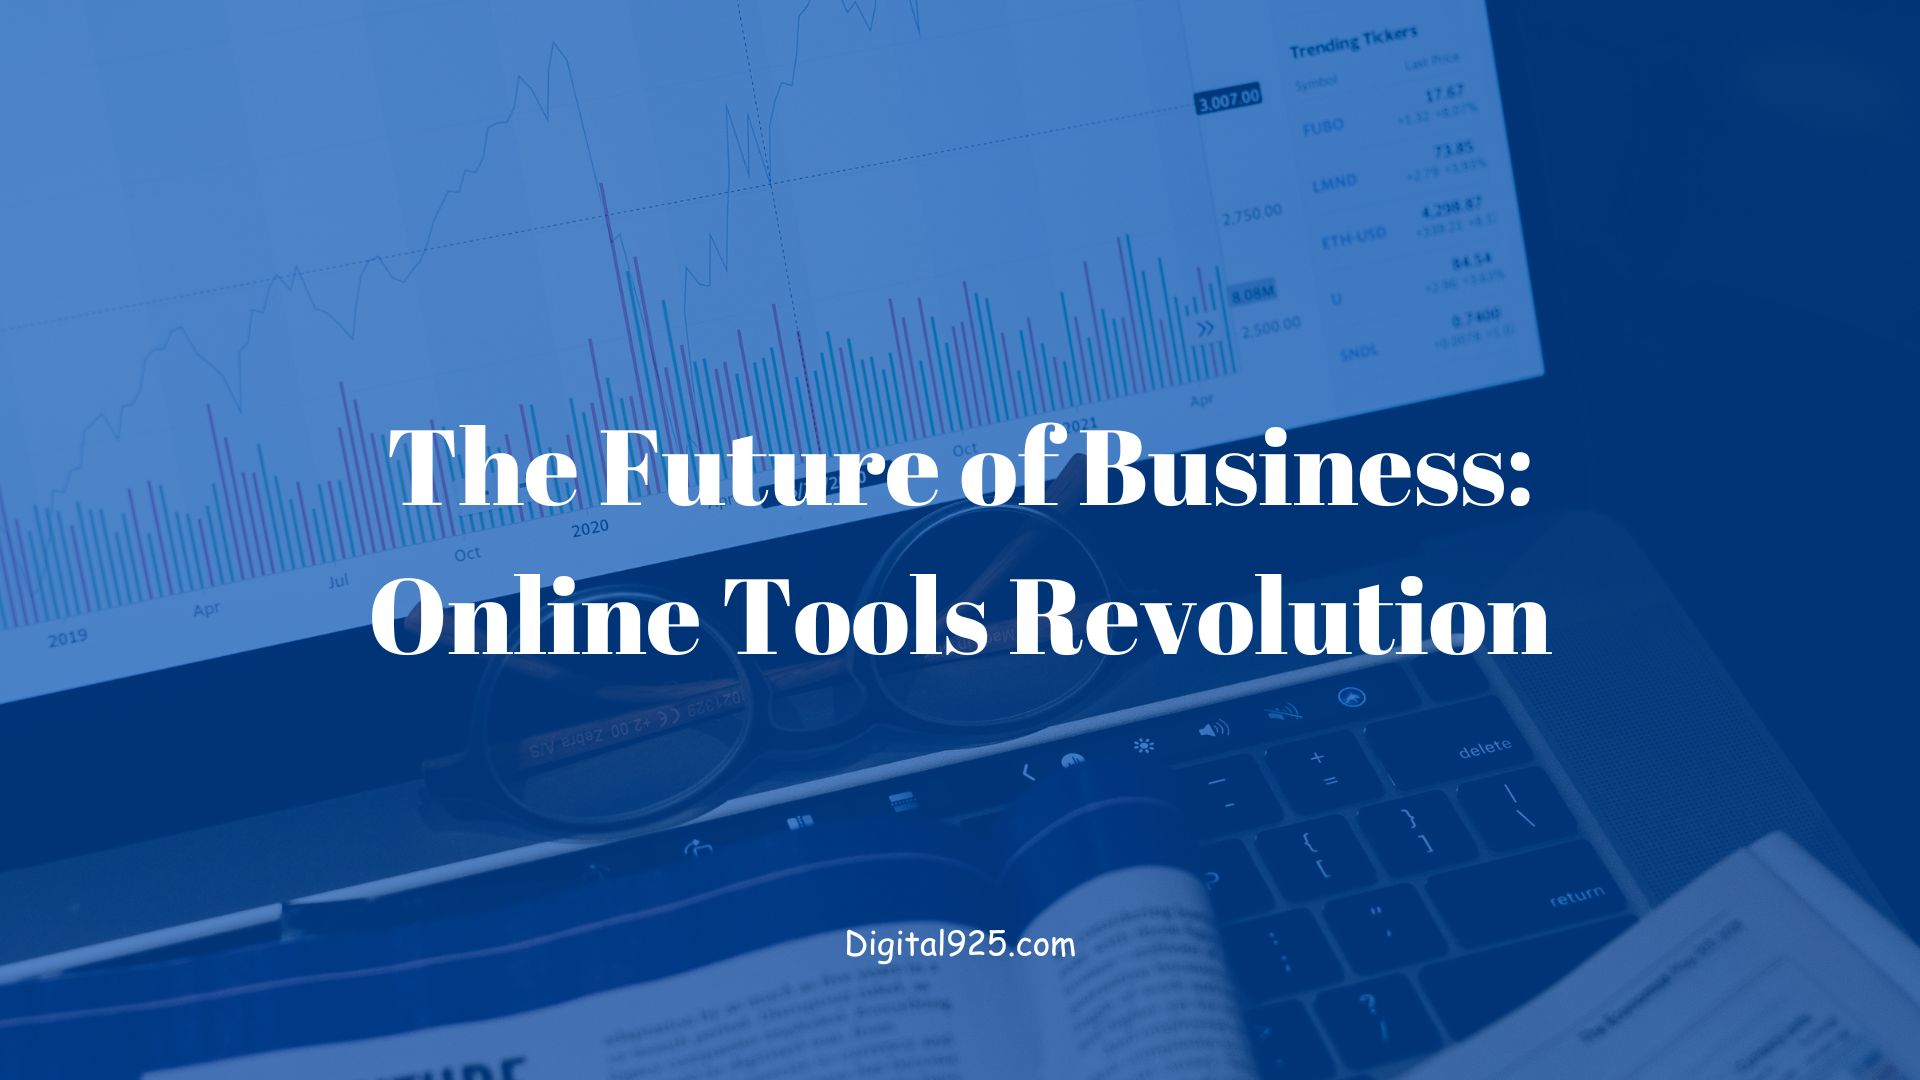 The Future of Business: Online Tools Revolution